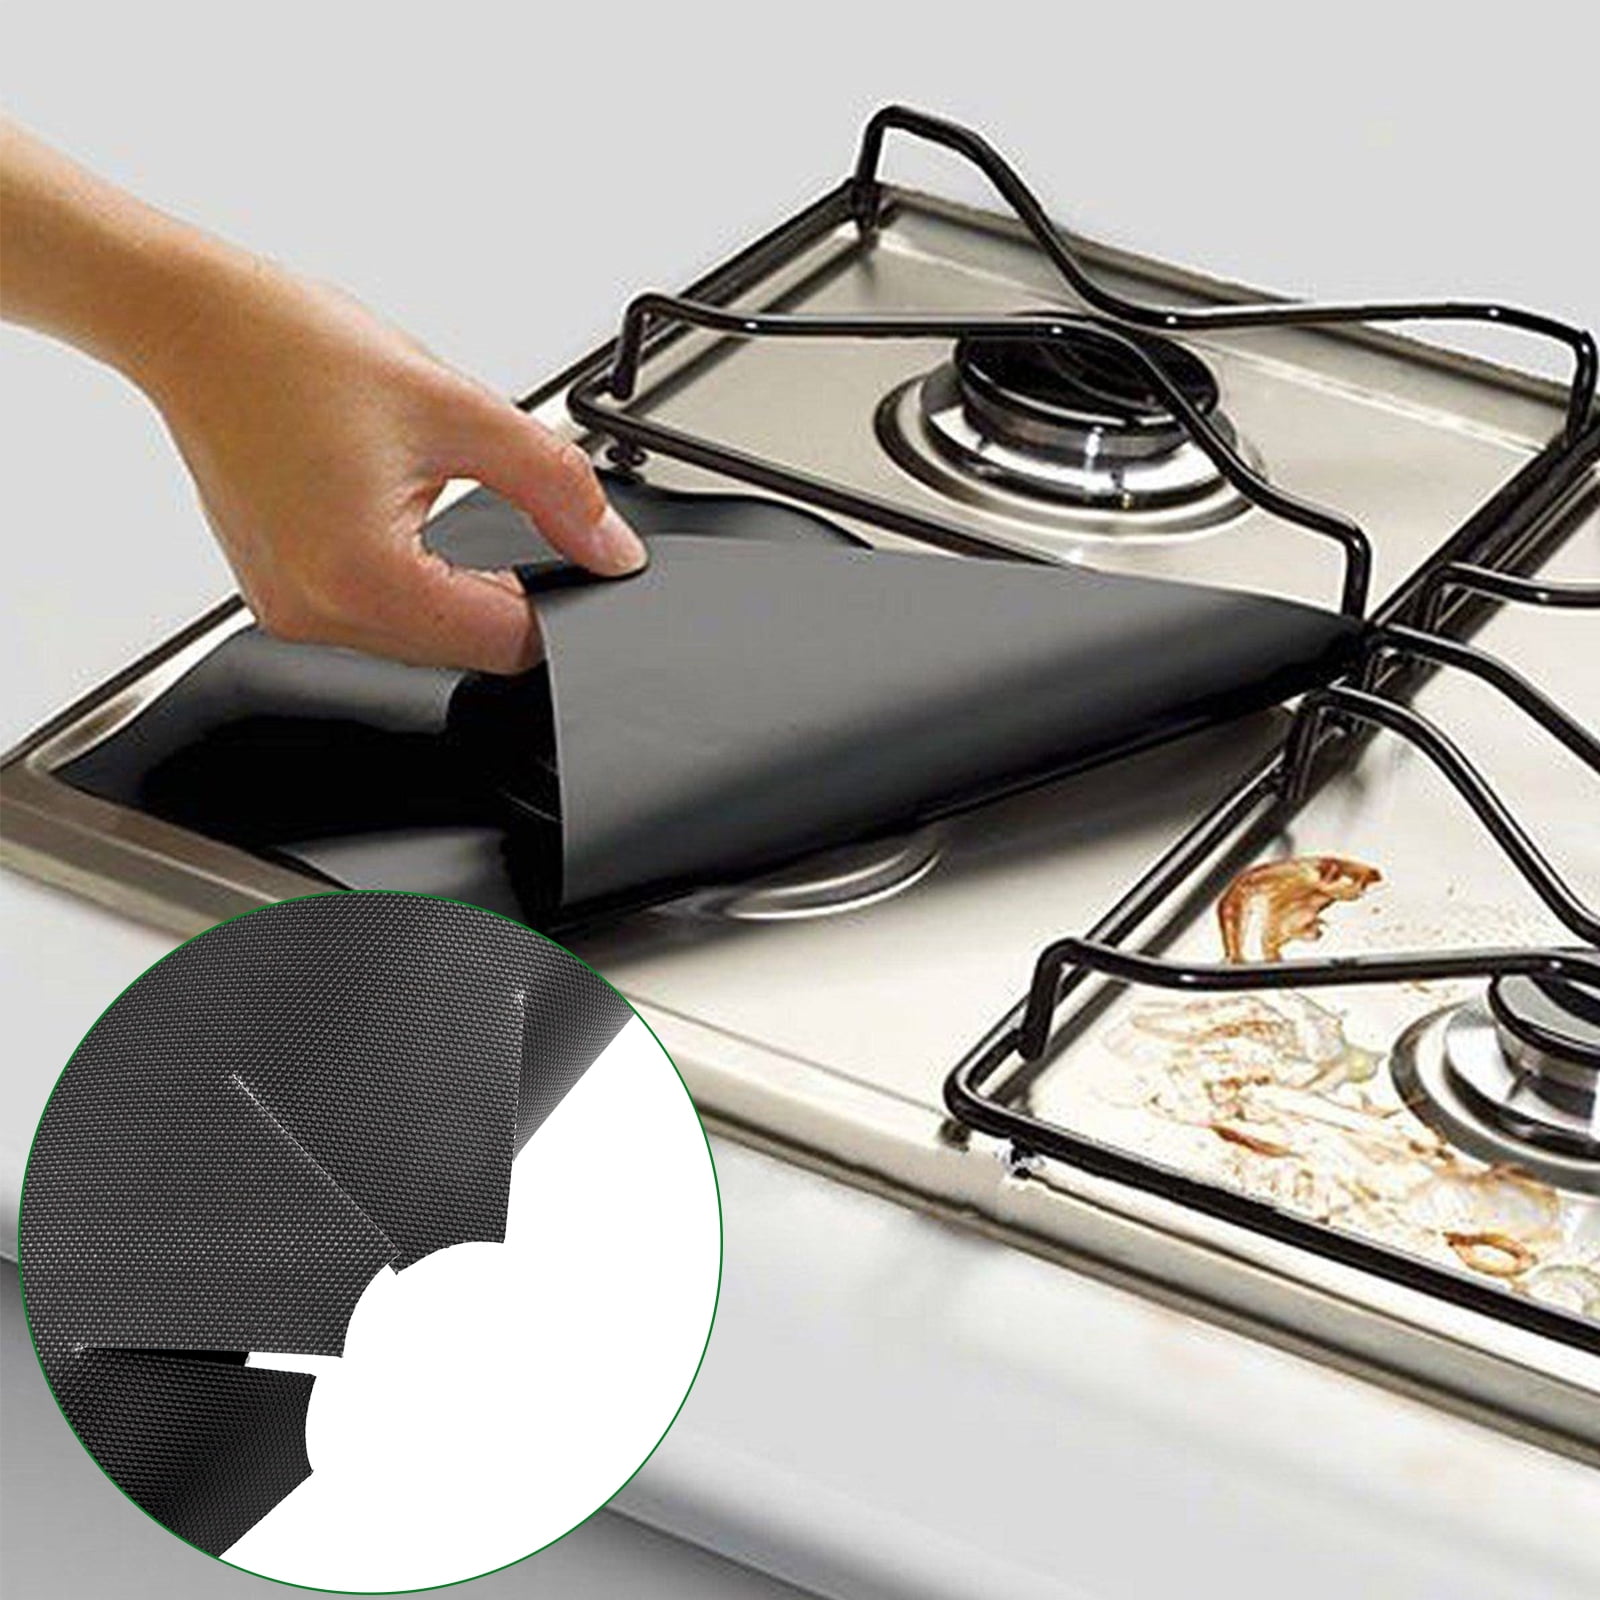 Black,4 Sinrextraonry Gas Hob Range Protectors Non-Stick Reusable Cooker Protector Stovetop Burner Protector Liner Cover Cleaners 